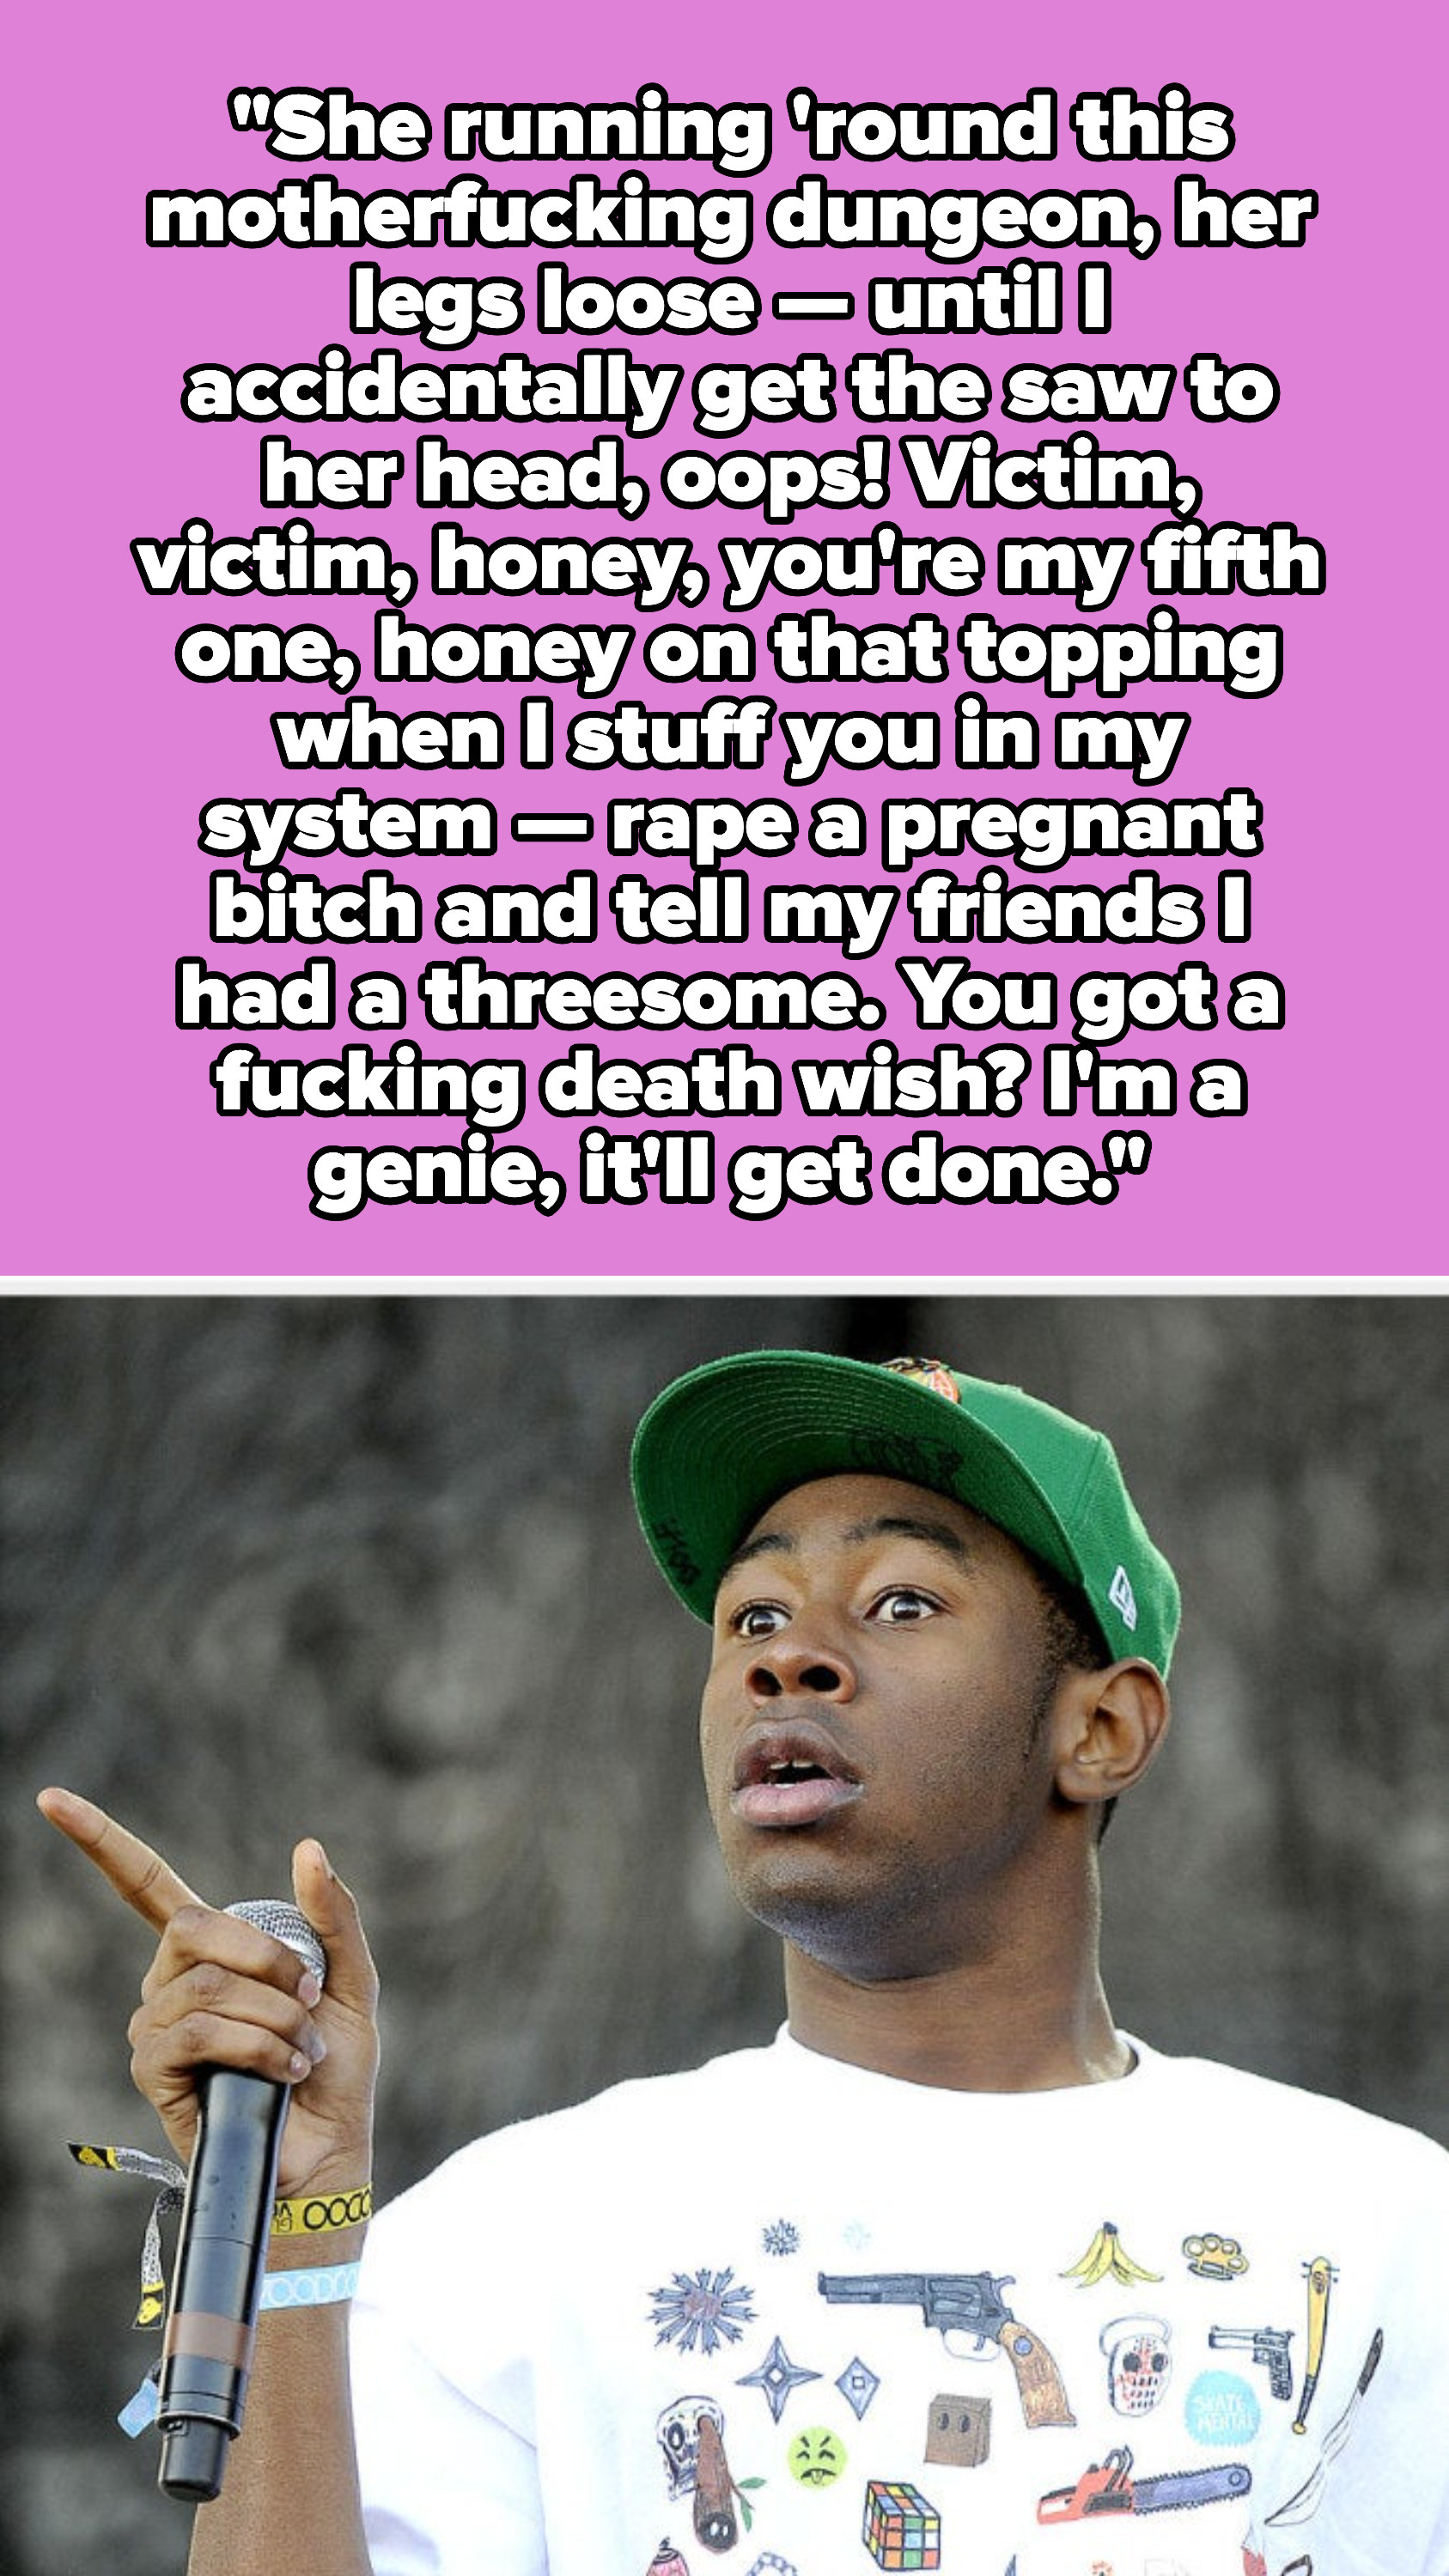 Tyler, the Creator lyrics: &quot;Victim, victim, honey, you&#x27;re my fifth one, honey on that topping when I stuff you in my system — rape a pregnant bitch and tell my friends I had a threesome. You got a fucking death wish? I&#x27;m a genie, it&#x27;ll get done&quot;